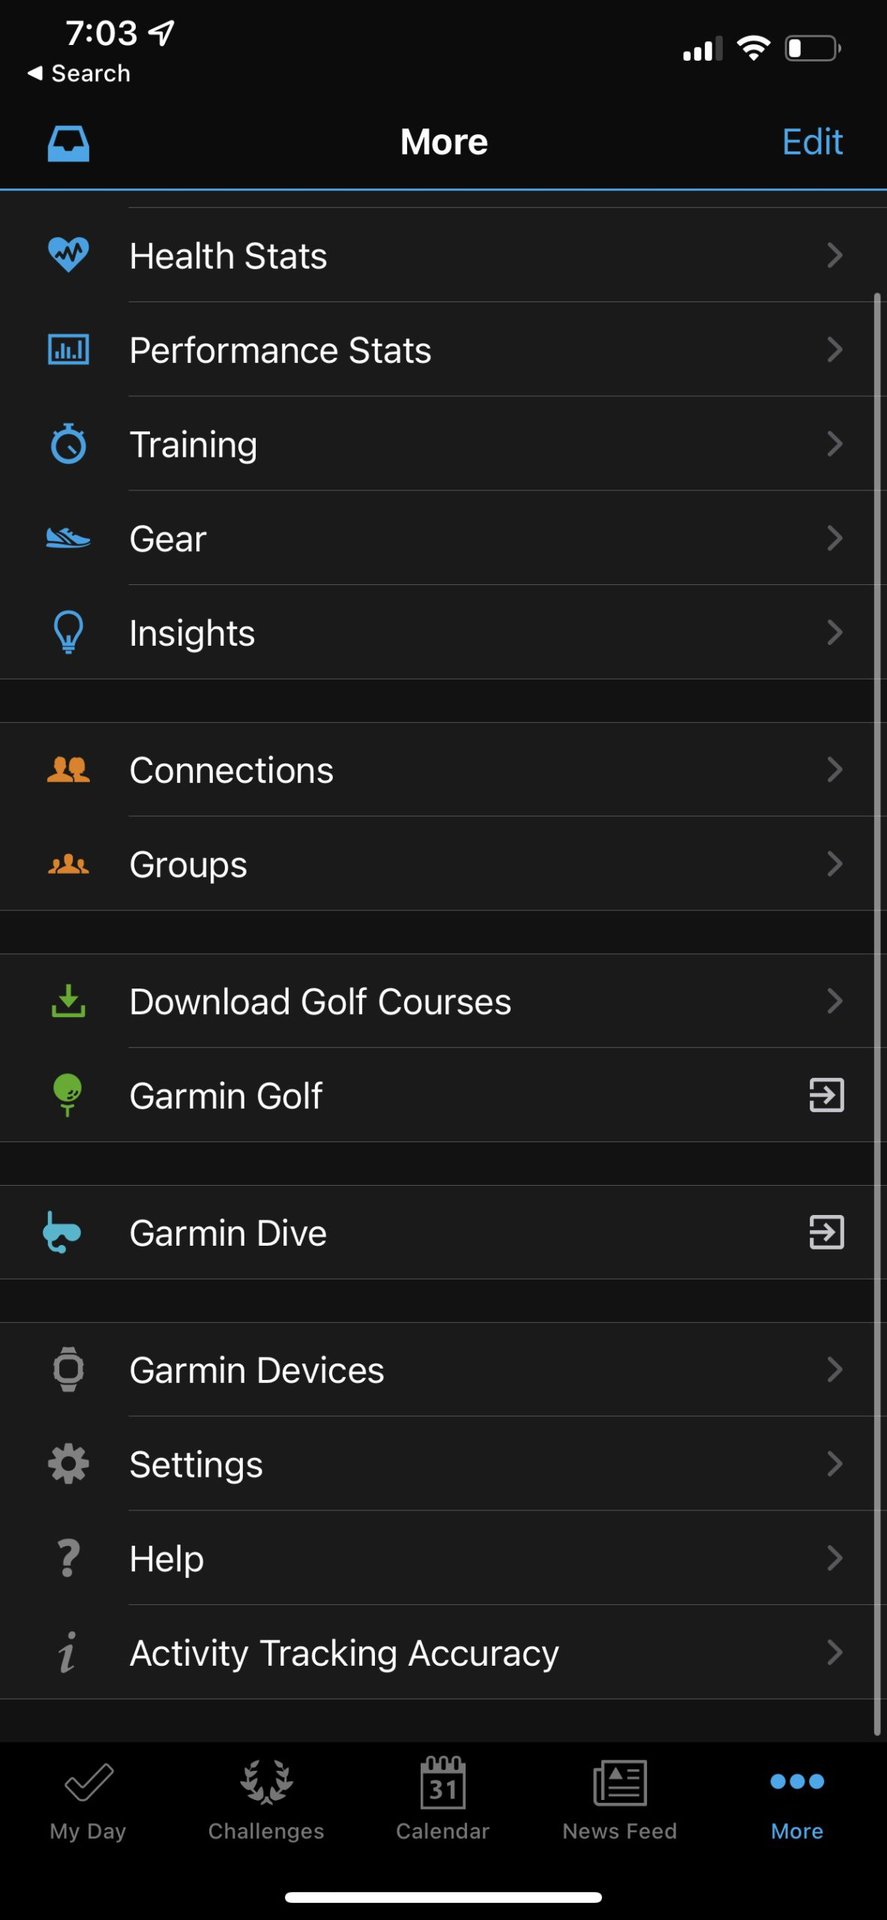 tidligere Gå forud gå på indkøb How to pair and sync your Garmin watch with your phone